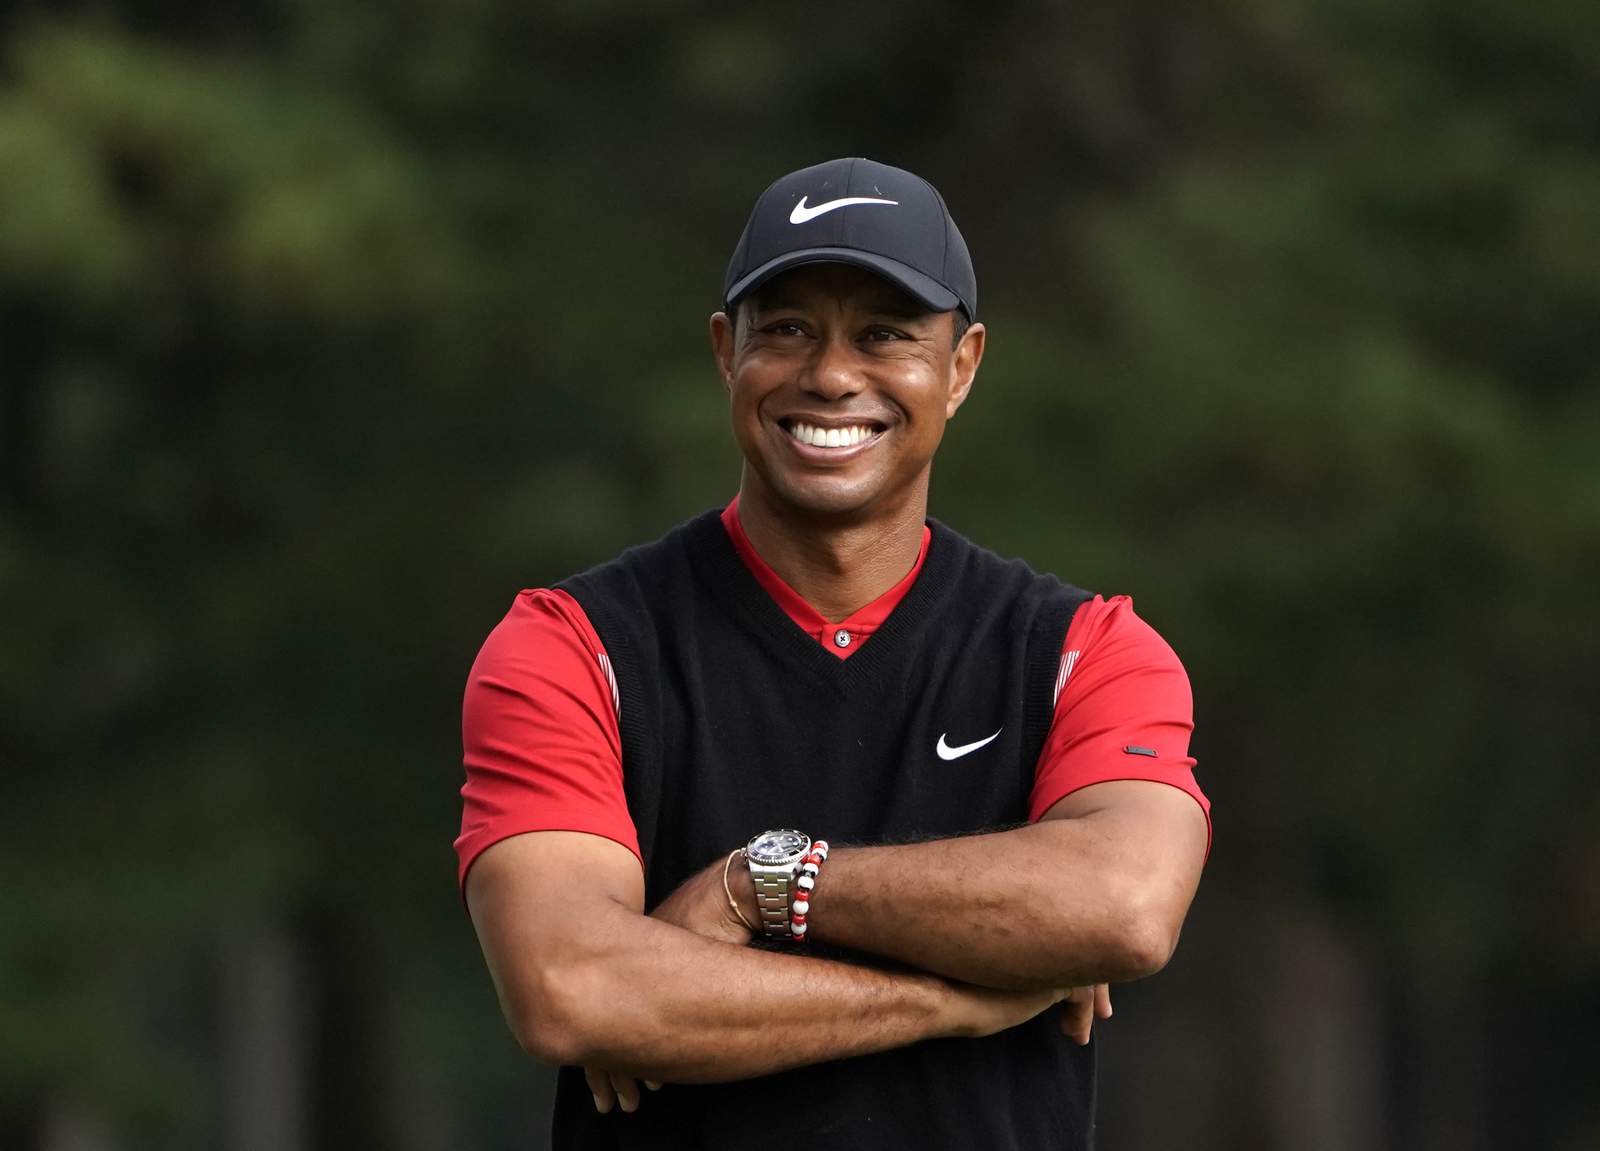 Tiger Woods out of hospital following crash that caused serious leg injuries